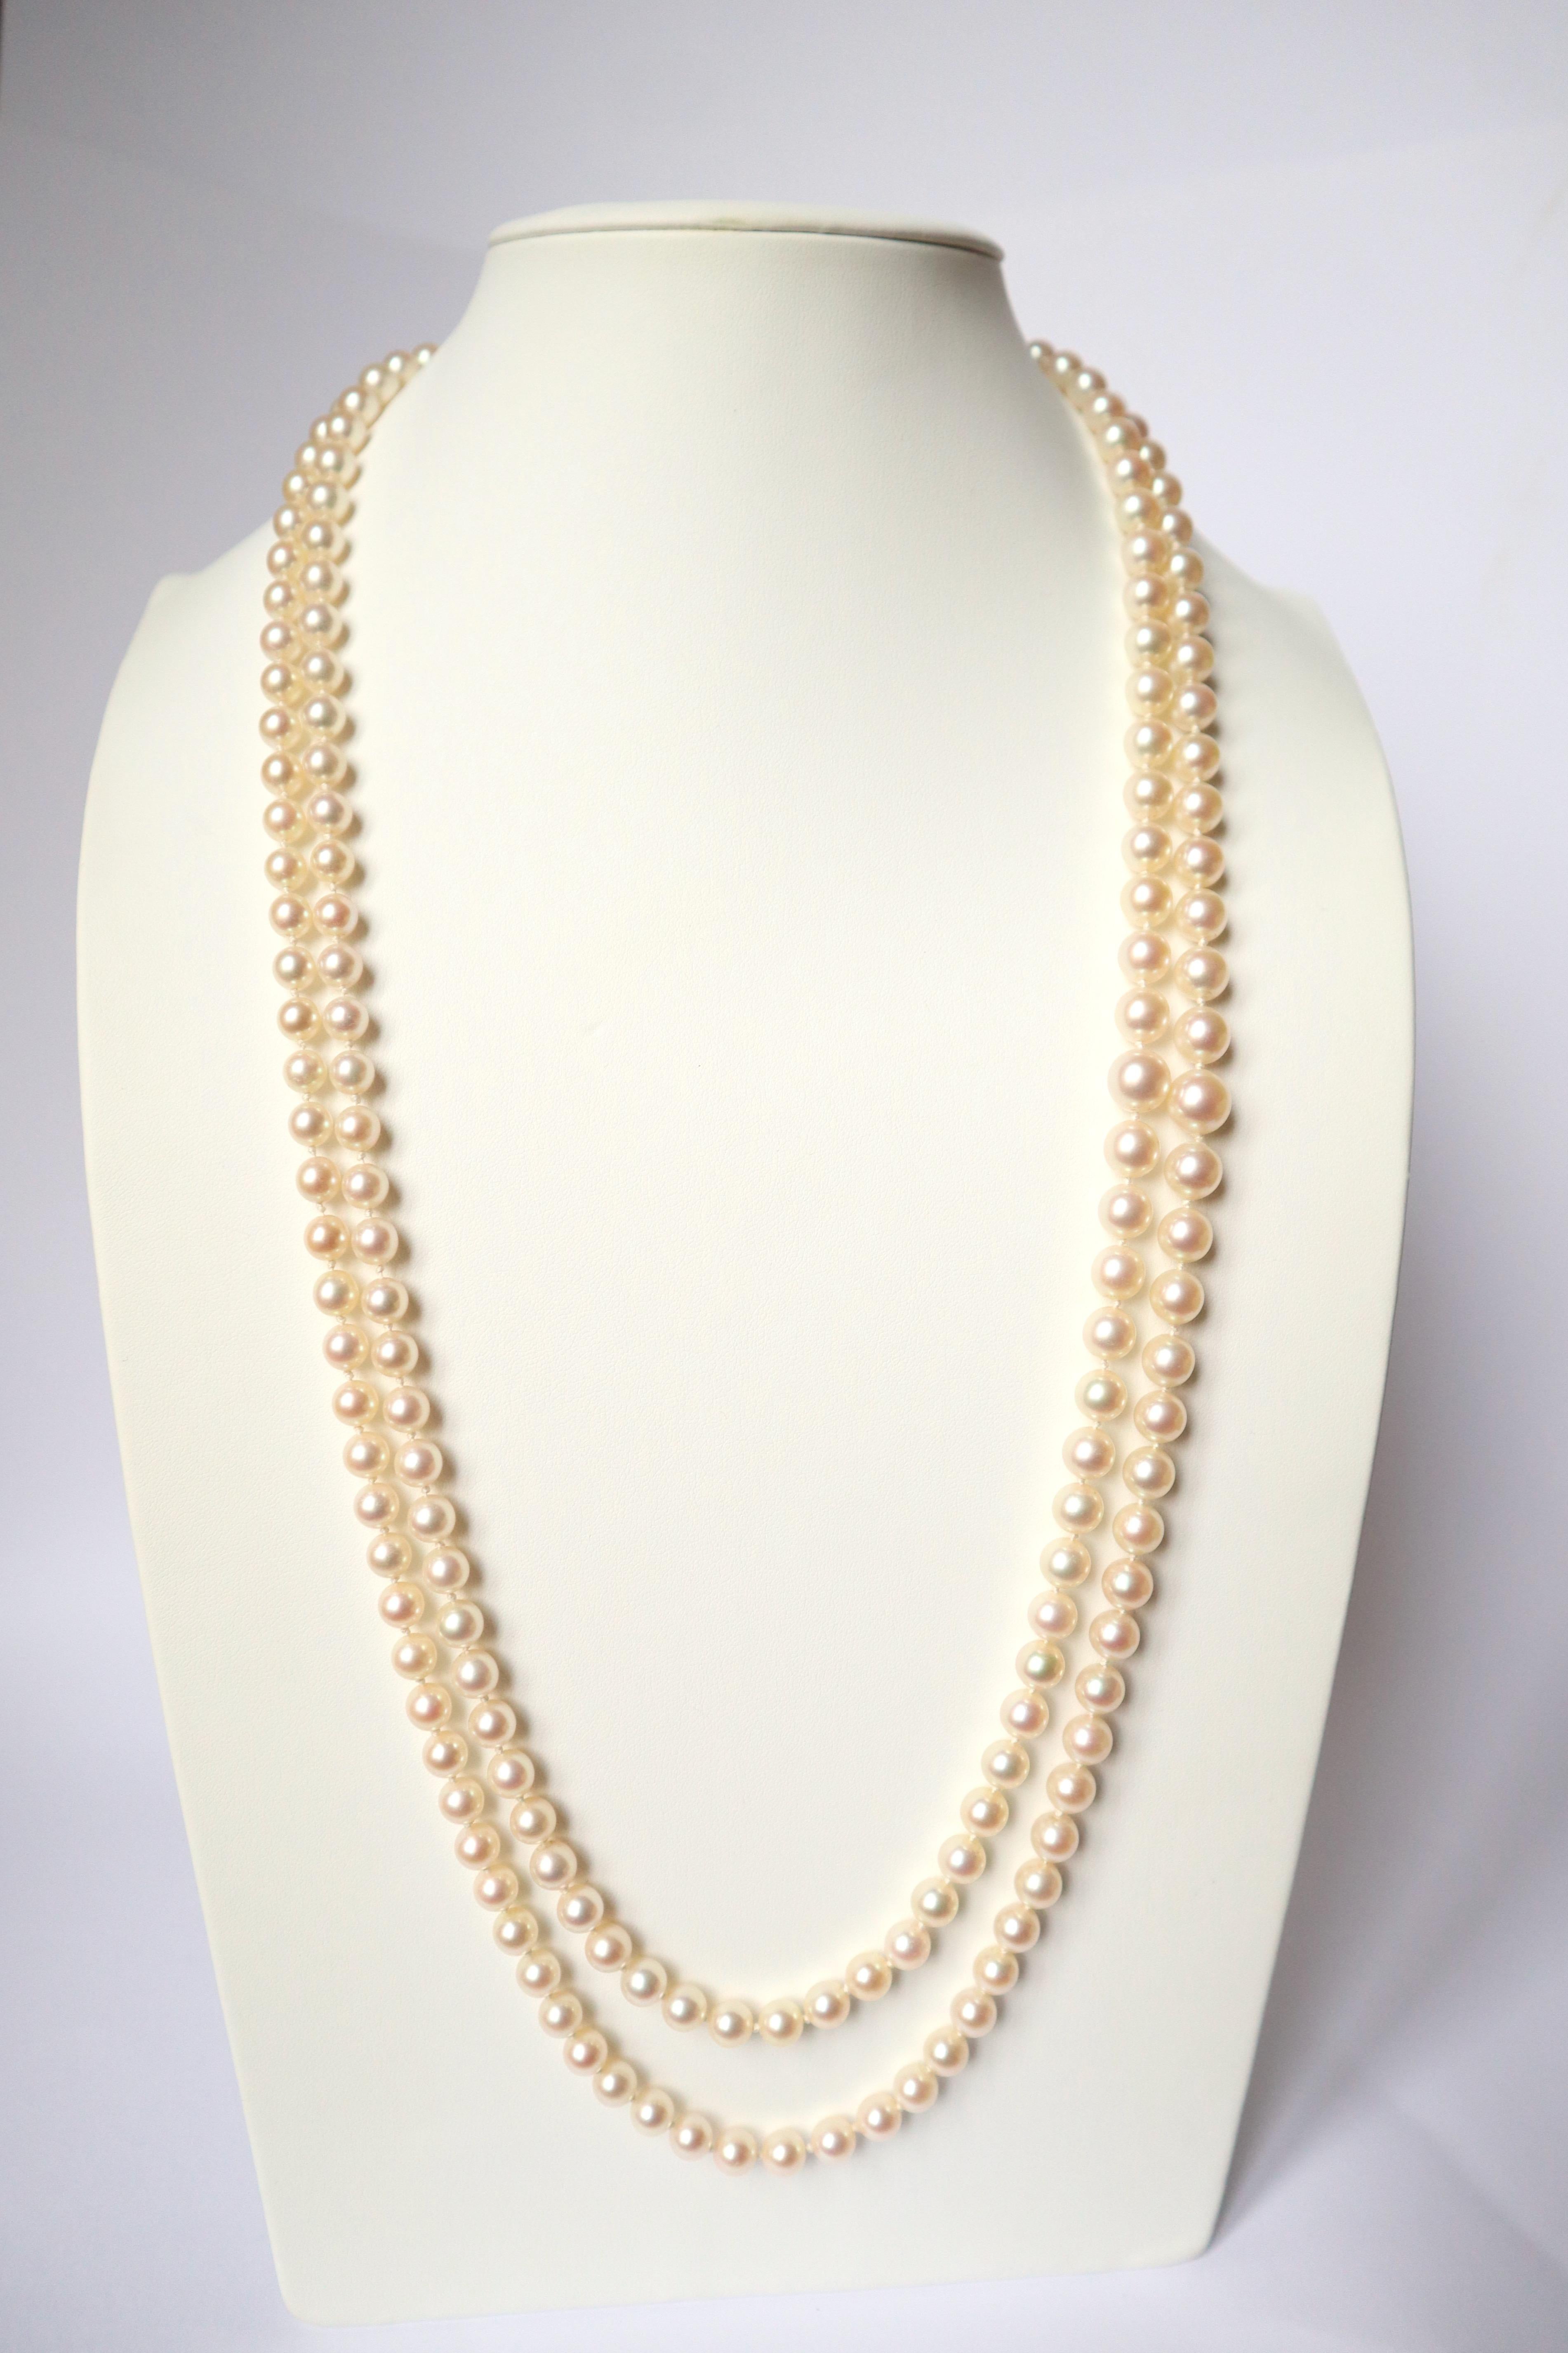 VAN CLEEF & ARPELS 2-row cultured pearls long necklace Sautoir
The necklace is signed and numbered 
Diameter of the beads approximately: 7mm
Clasp in 18 kt white gold and diamonds for approximately 3.5 carats 750 gold and 950 platinum.
Dog's head